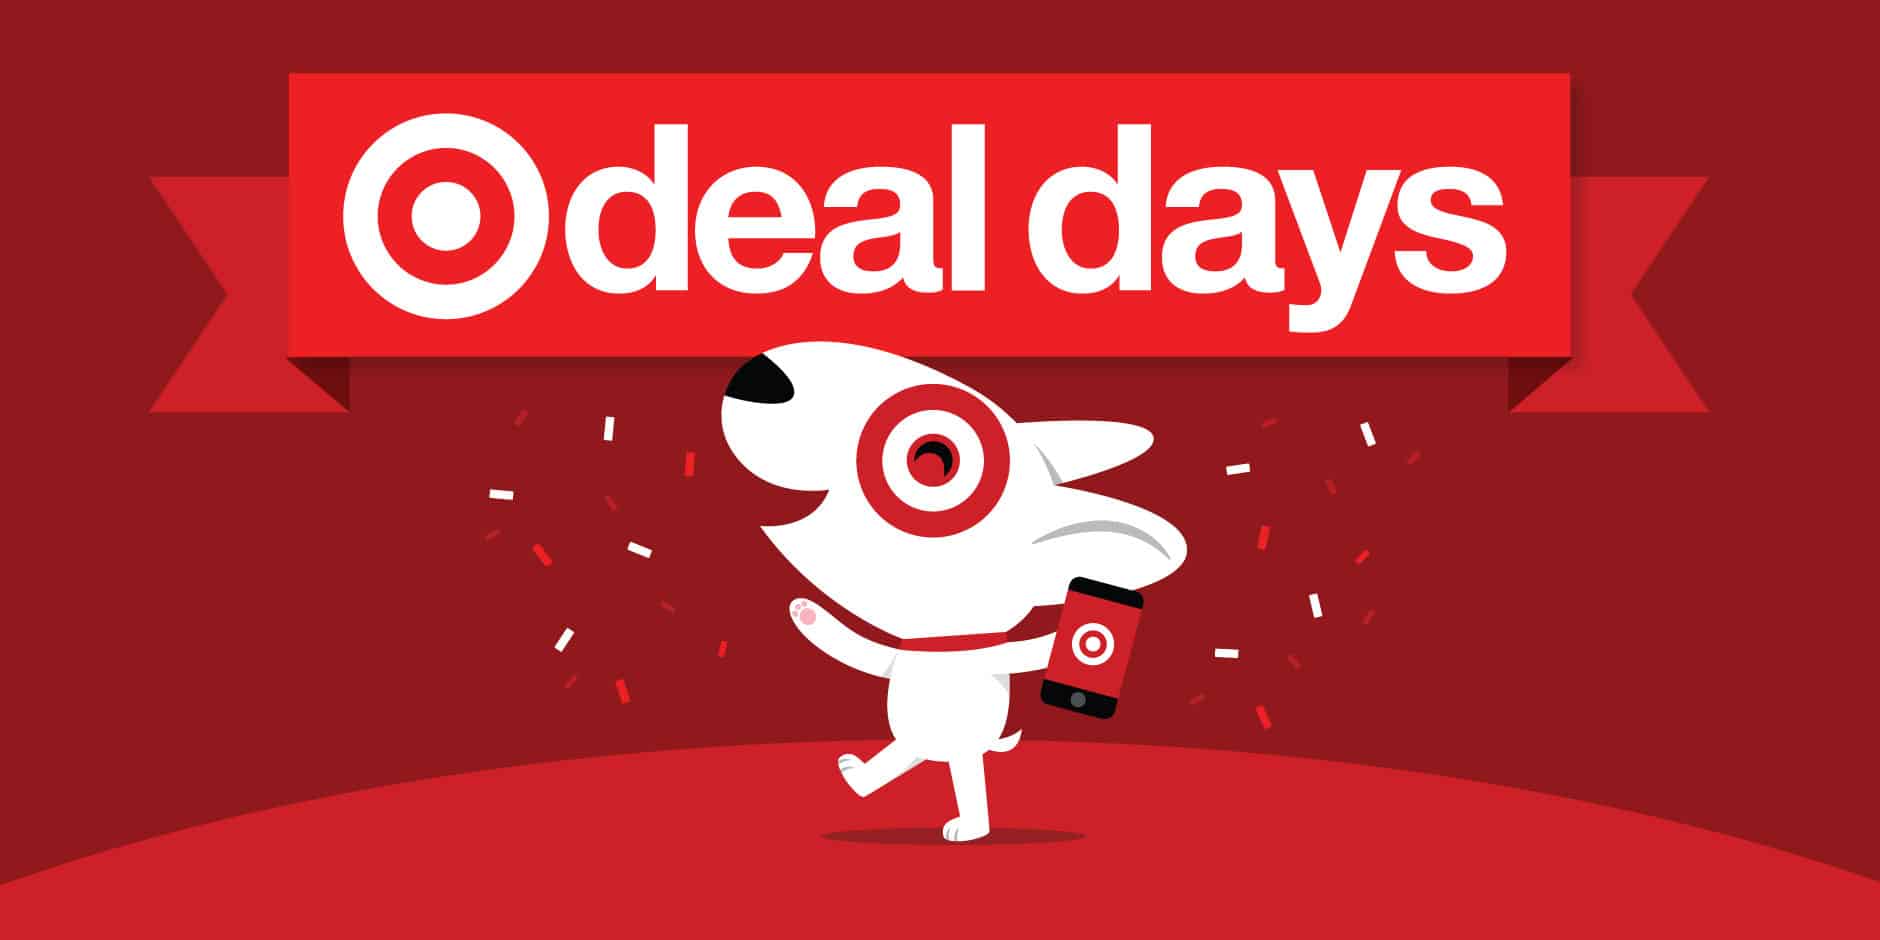 Target Deal Days, Black Friday Pricing All November Long and Extended Price Match Guarantee